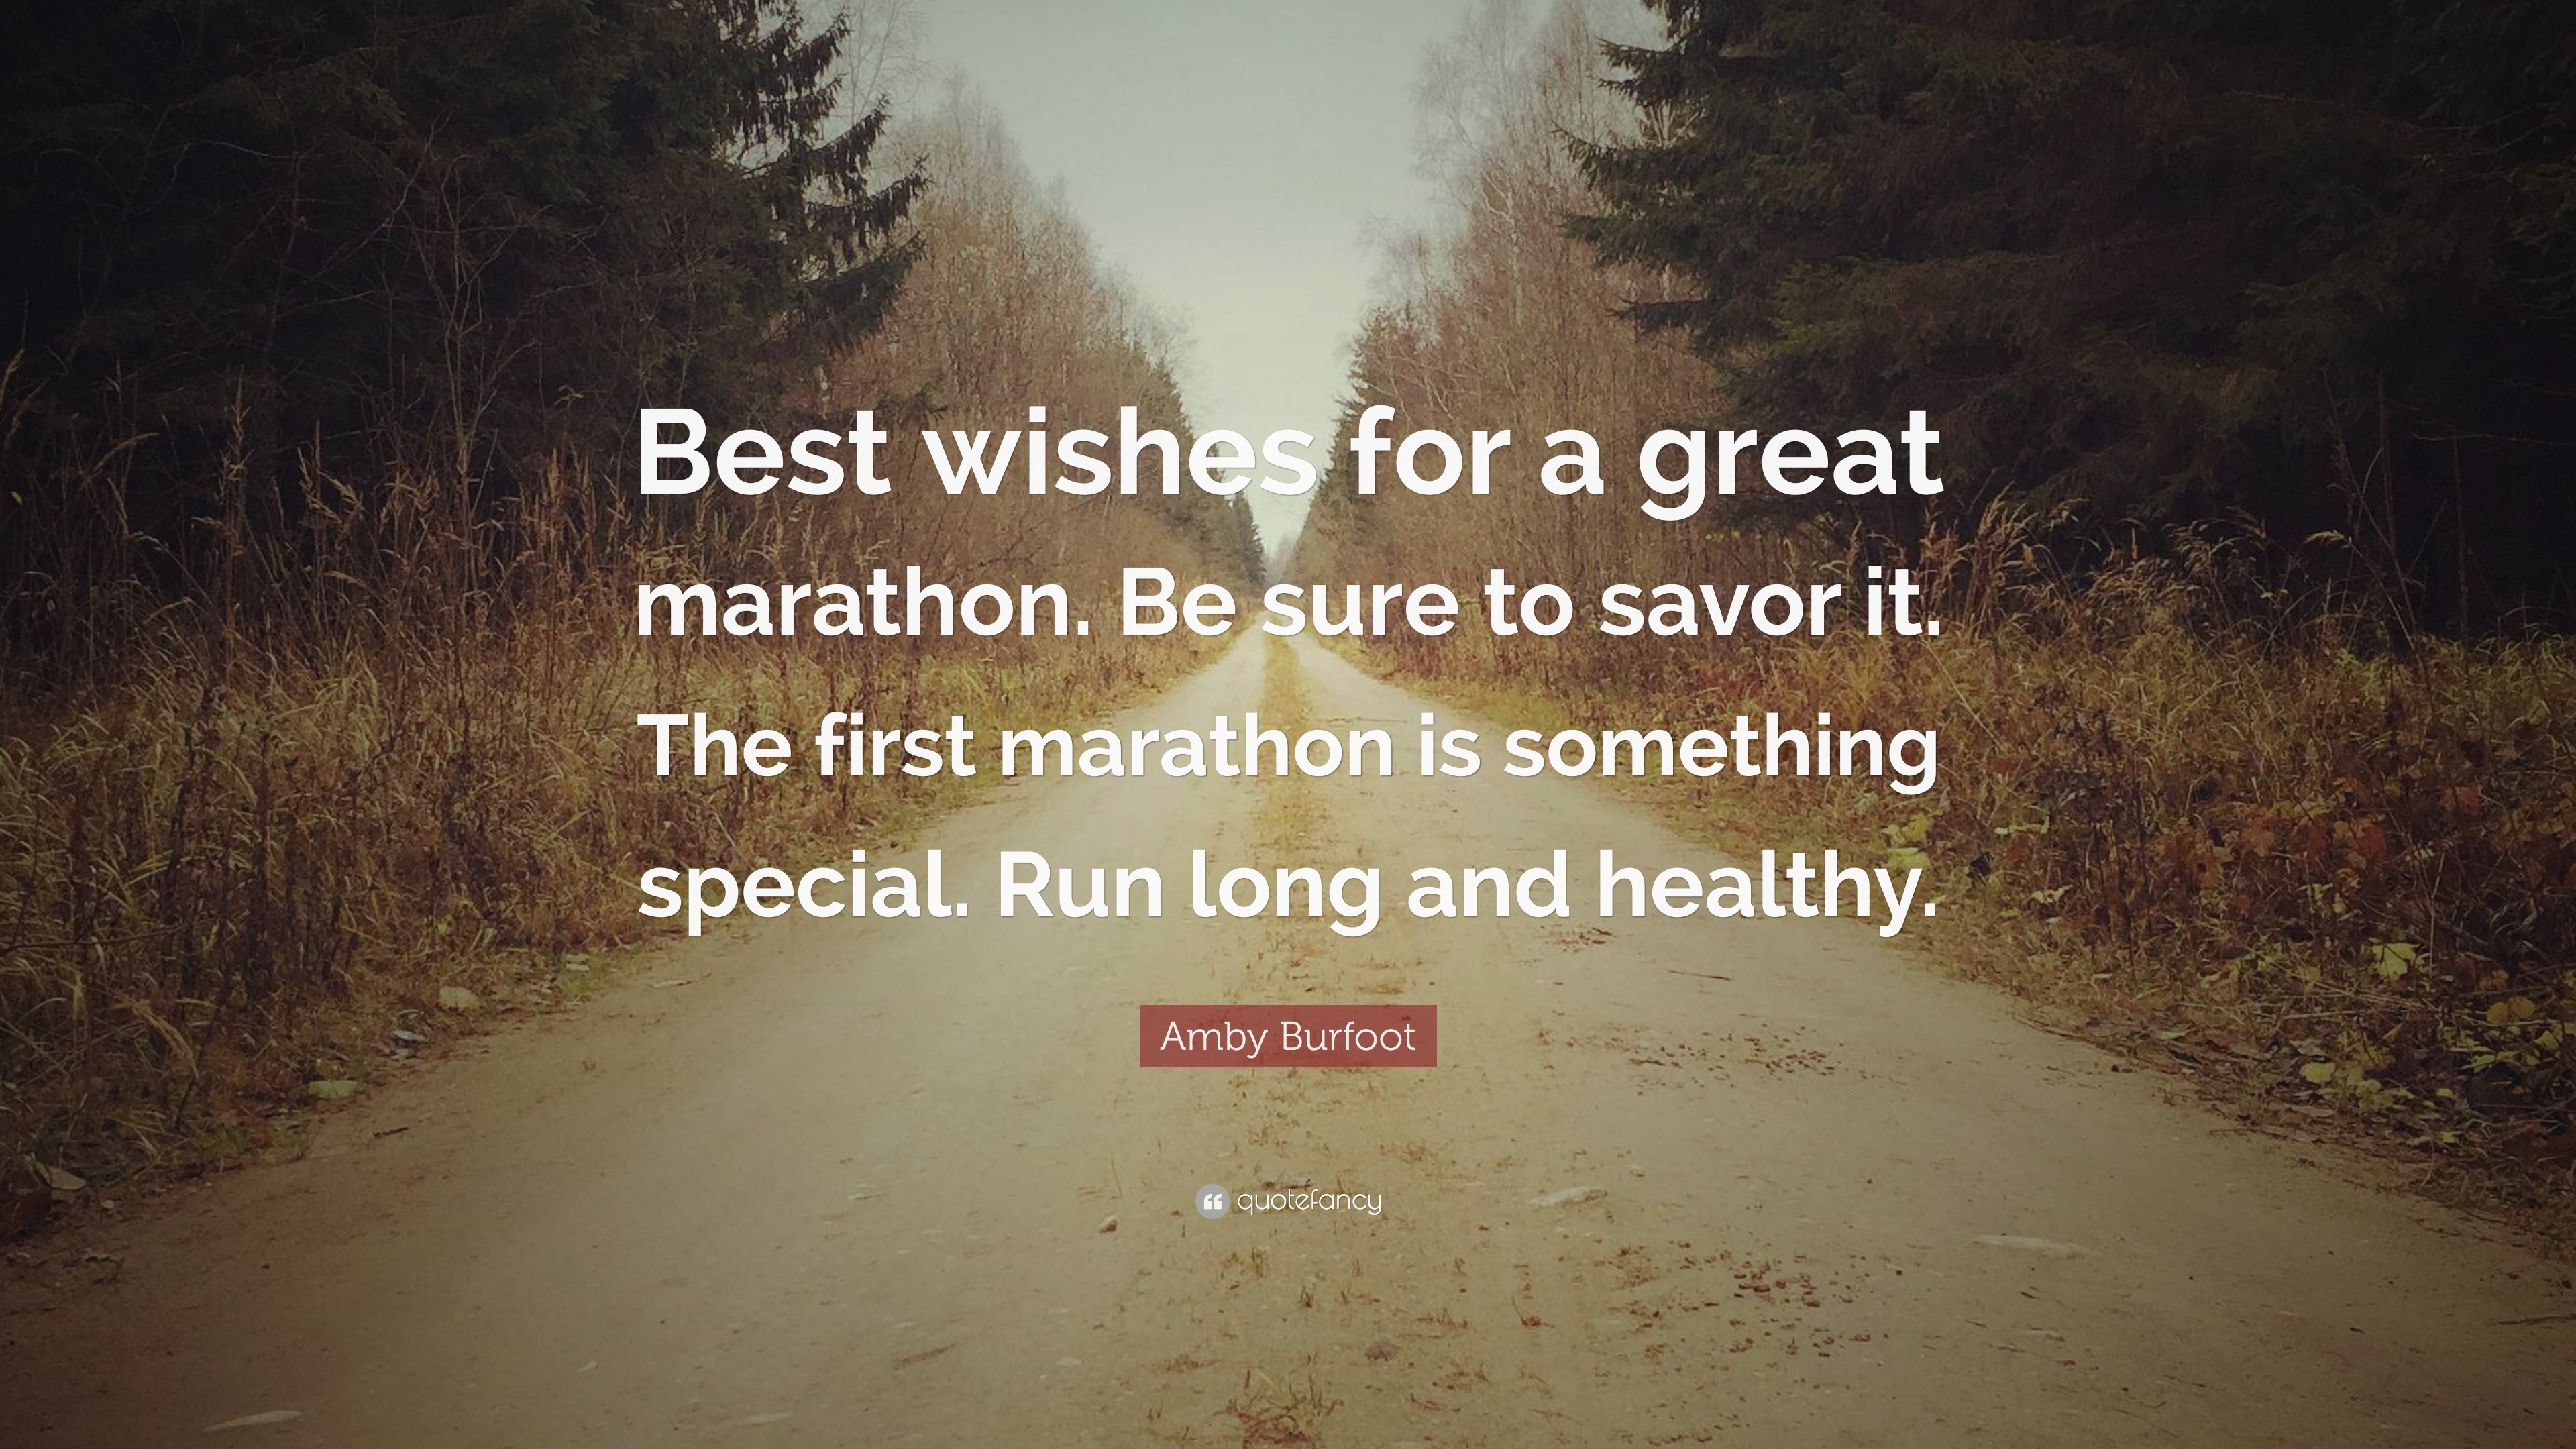 3840x2160 Amby Burfoot Quote: “Best wishes for a great marathon. Be sure to savor